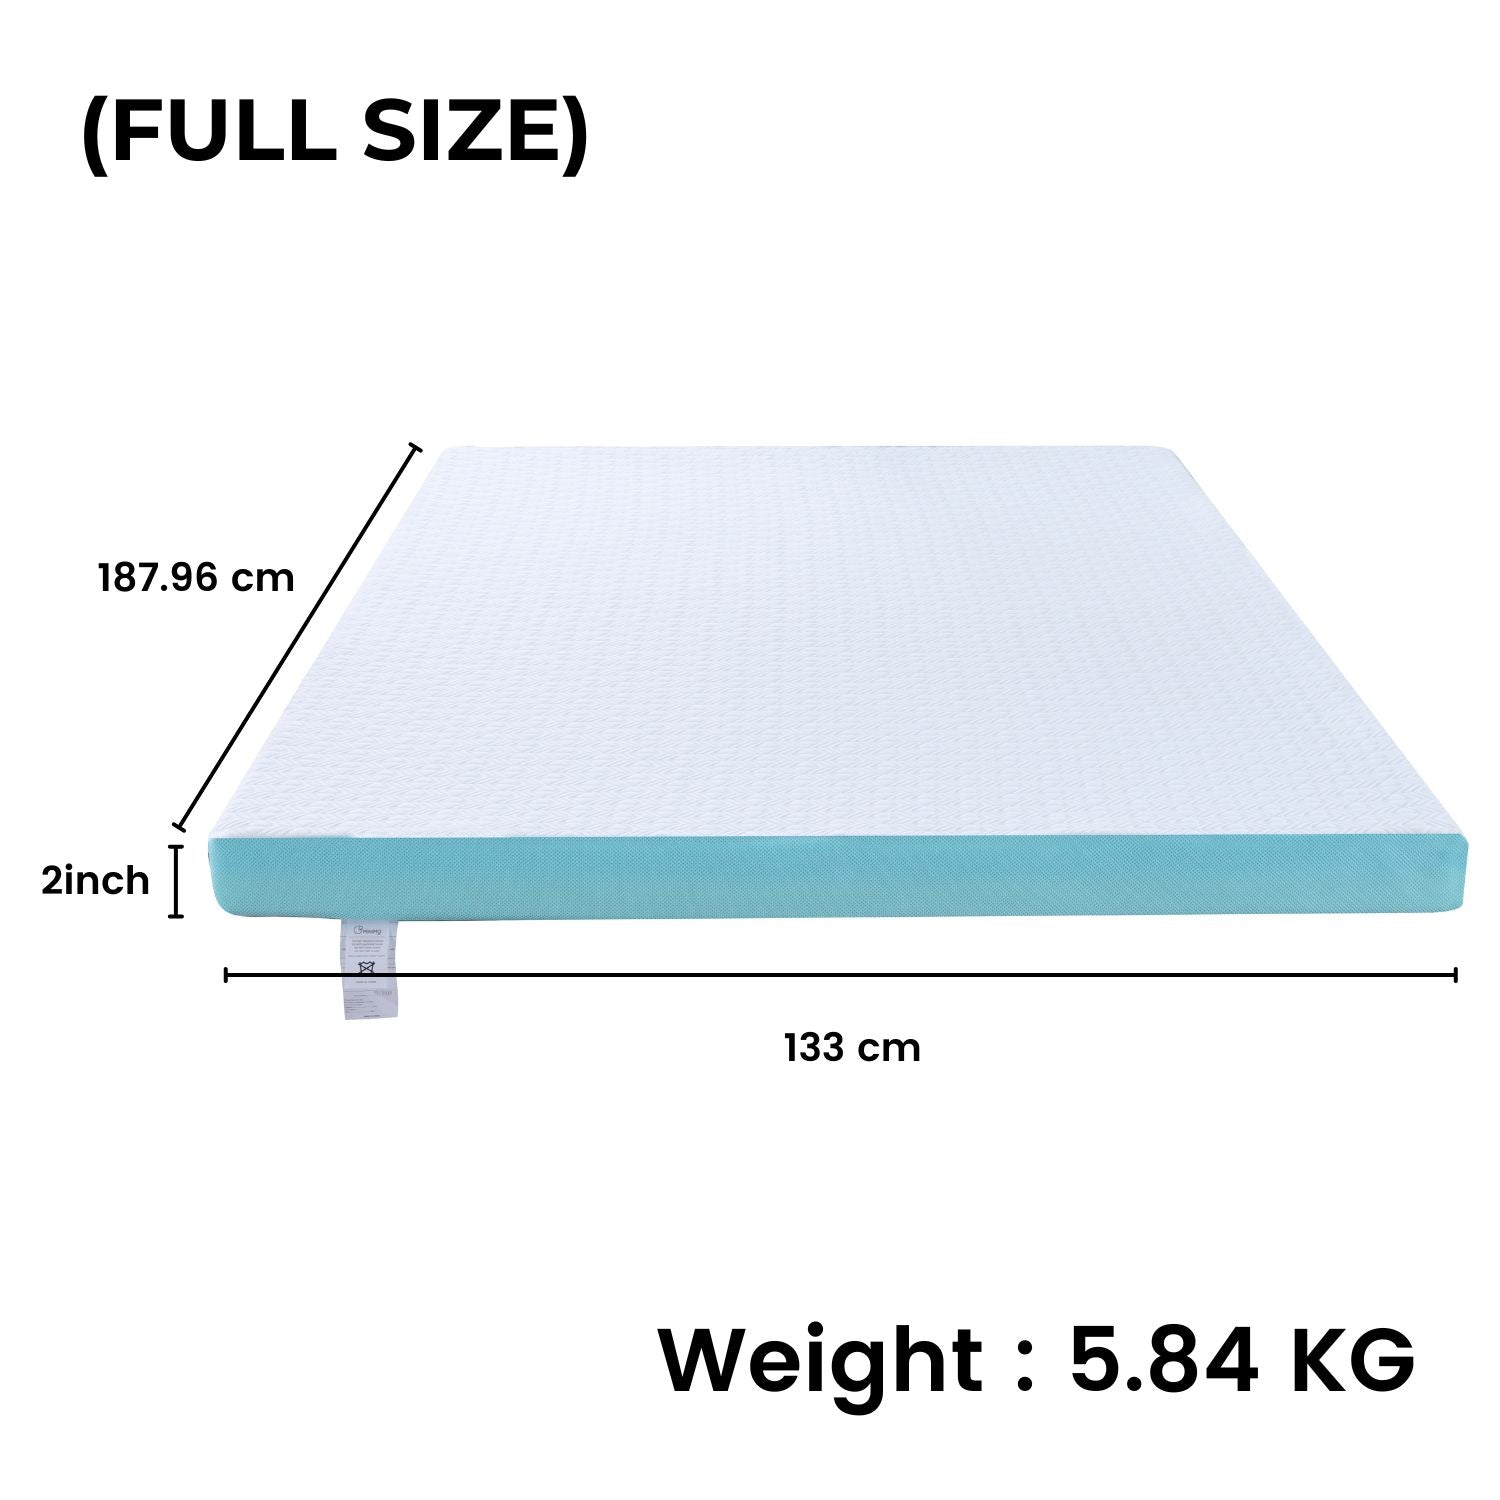 GOMINIMO Dual Layer Mattress Topper 2 inch with Gel Infused (Full)